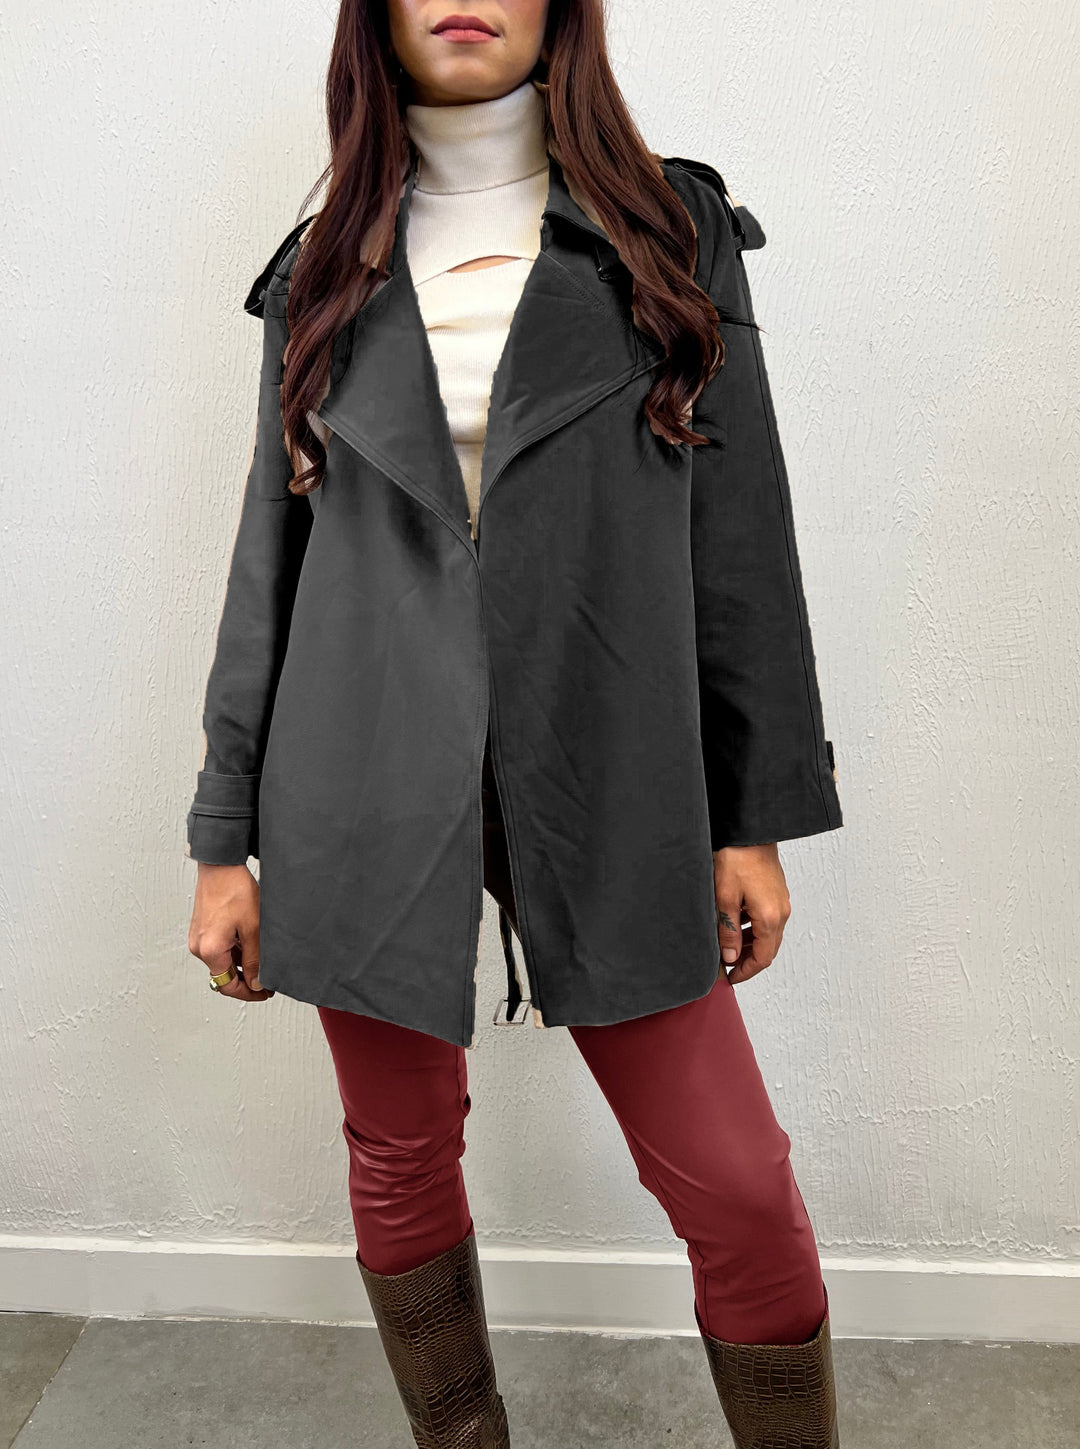 Unconventional Style in Unique Black Trench Coat